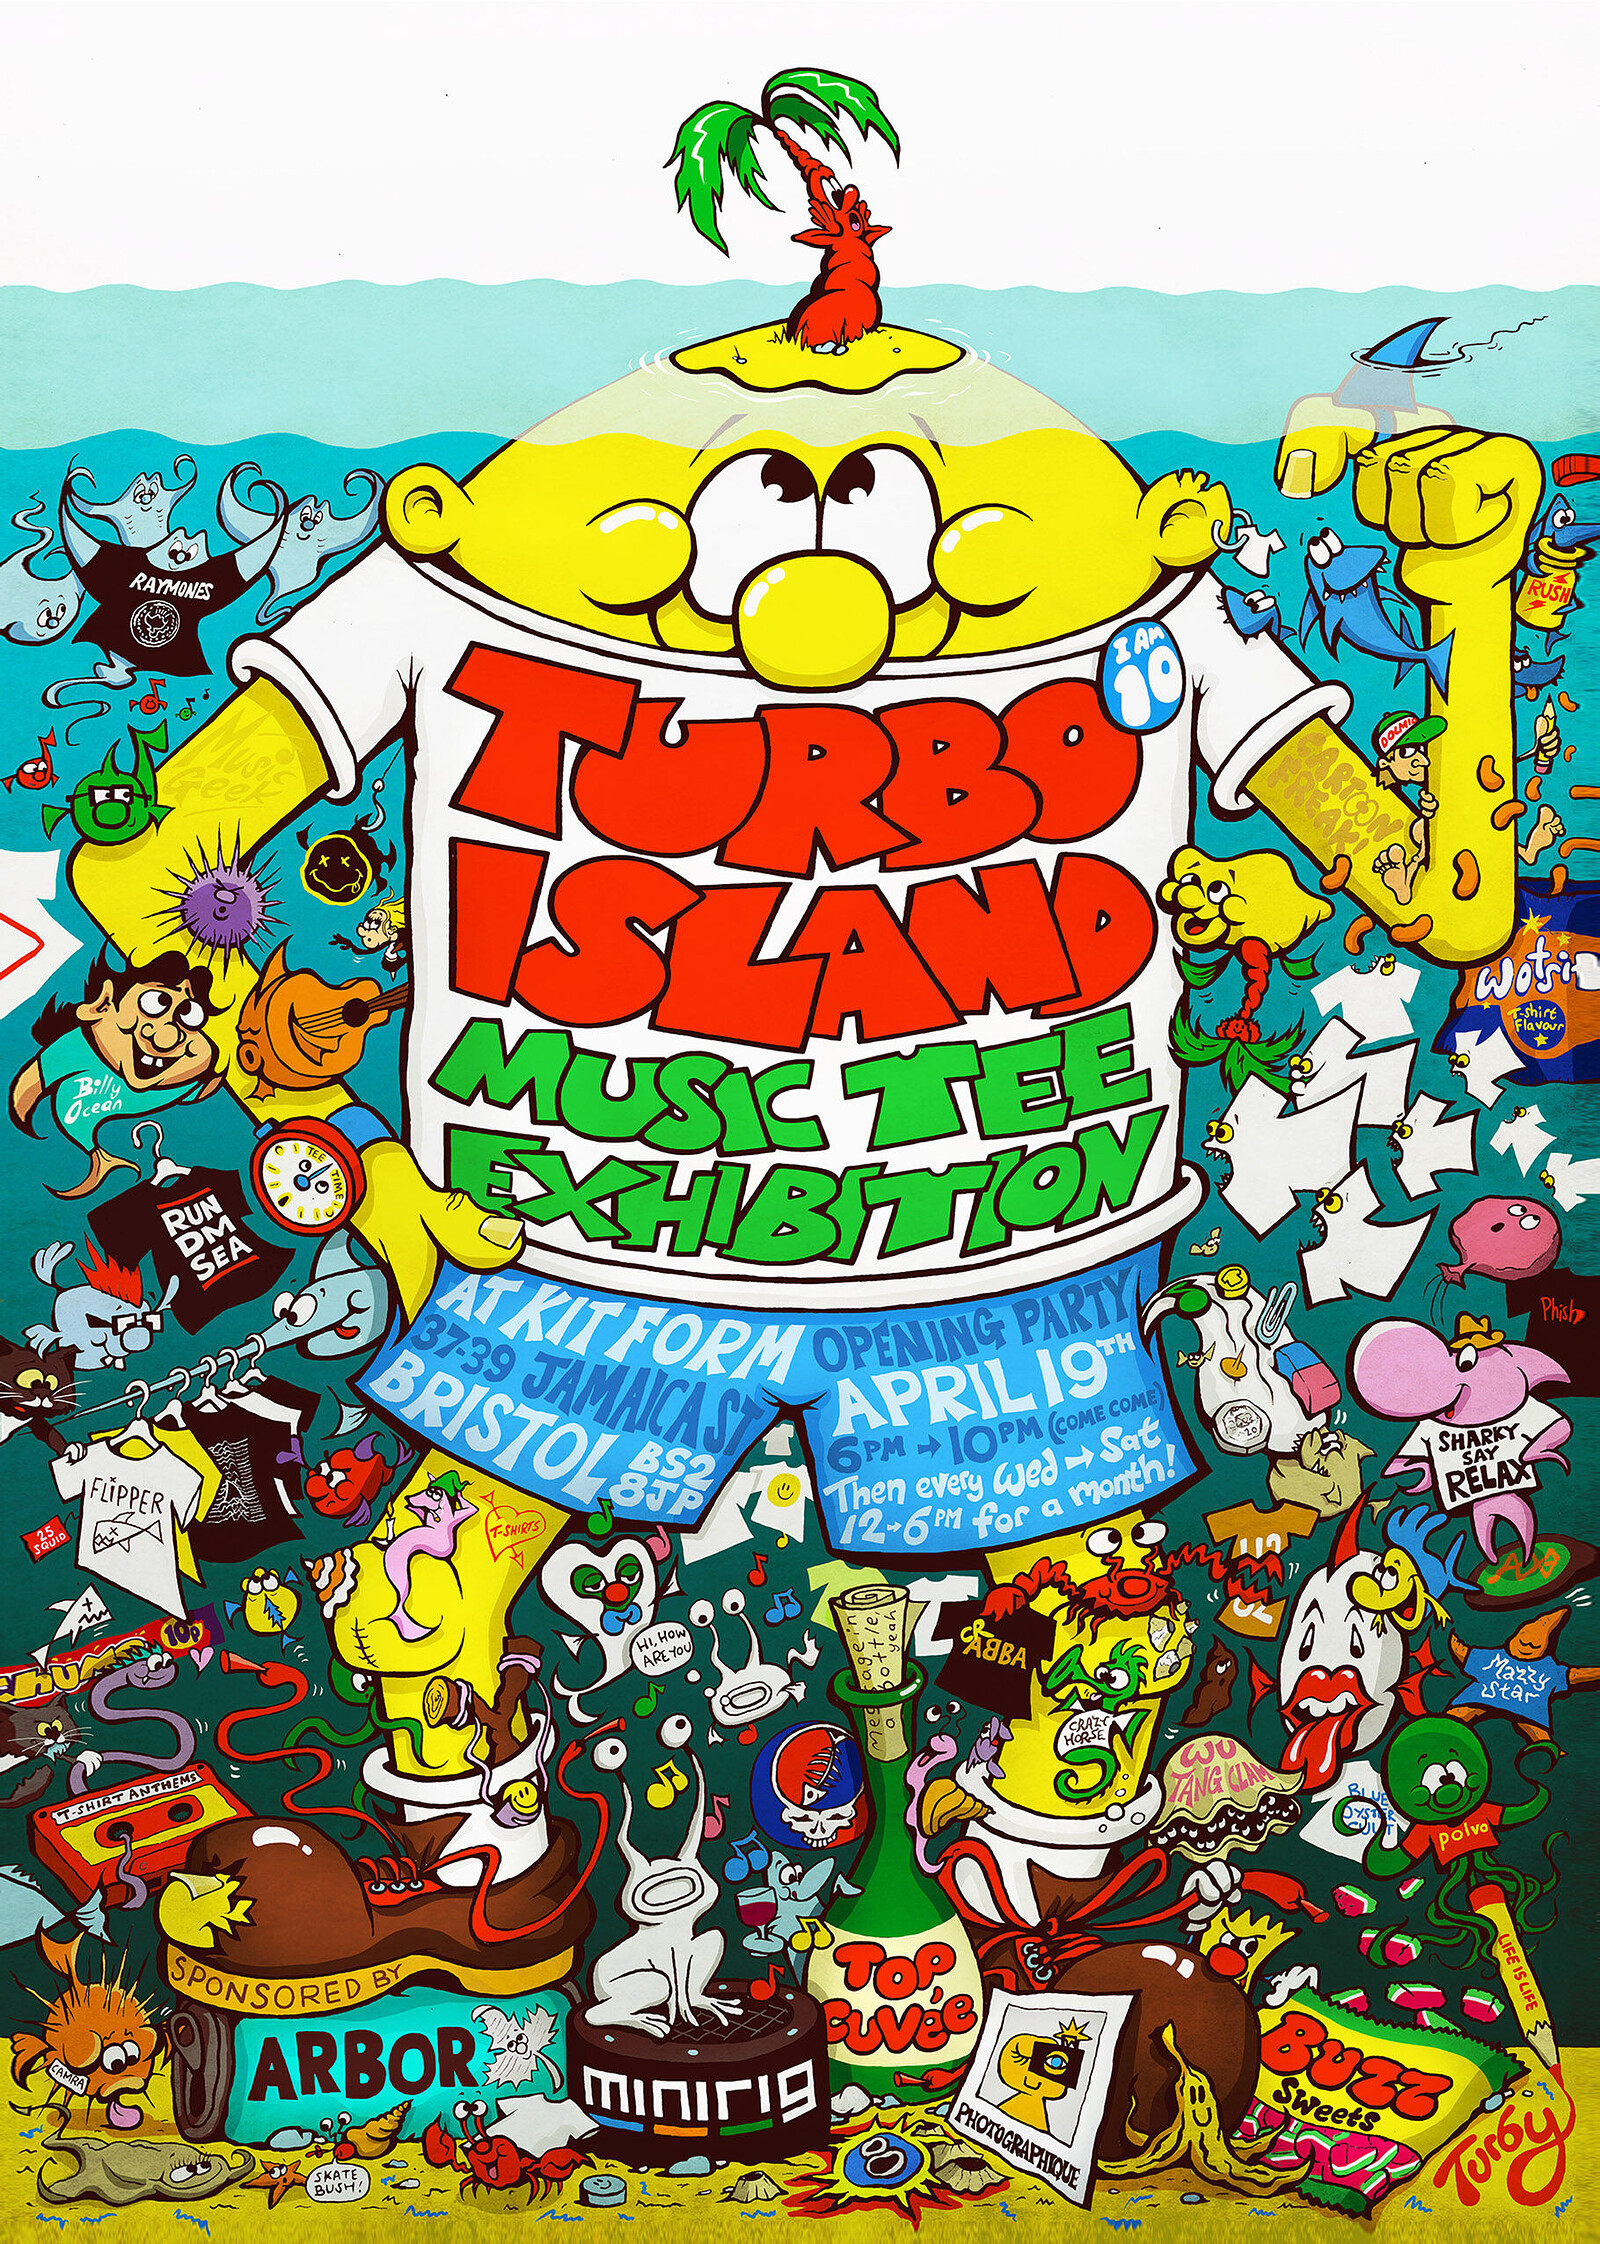 FINAL DAY of the TURBO ISLAND music tee exhibition at KIT FORM